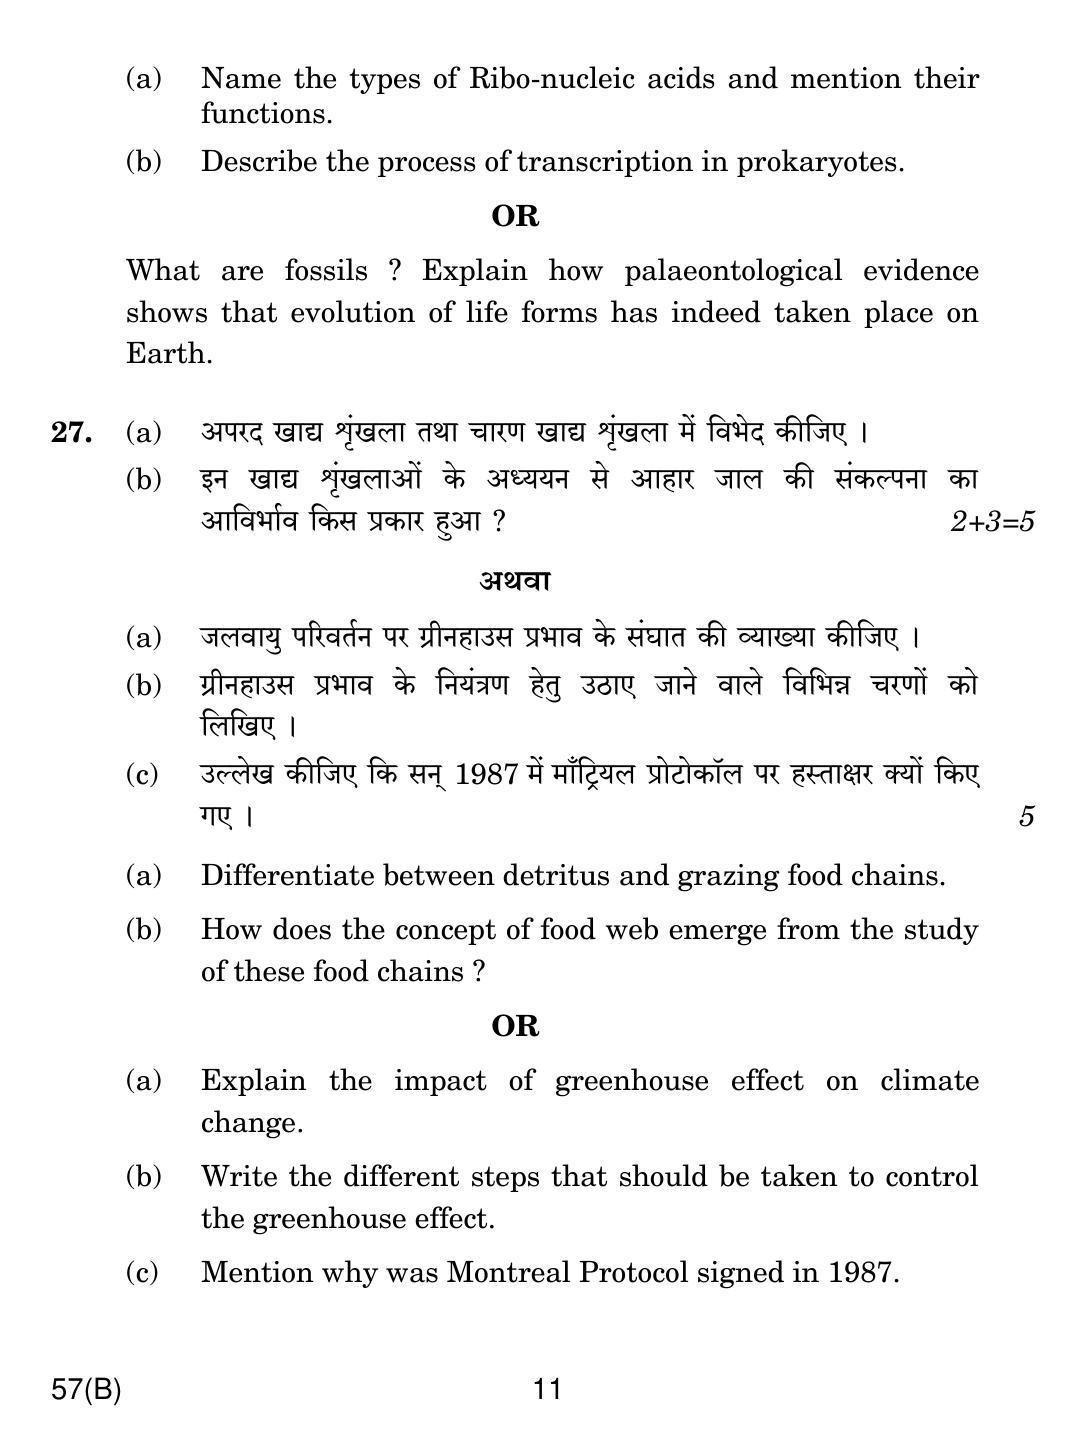 CBSE Class 12 57(B) Biology For Blind 2019 Question Paper - Page 11